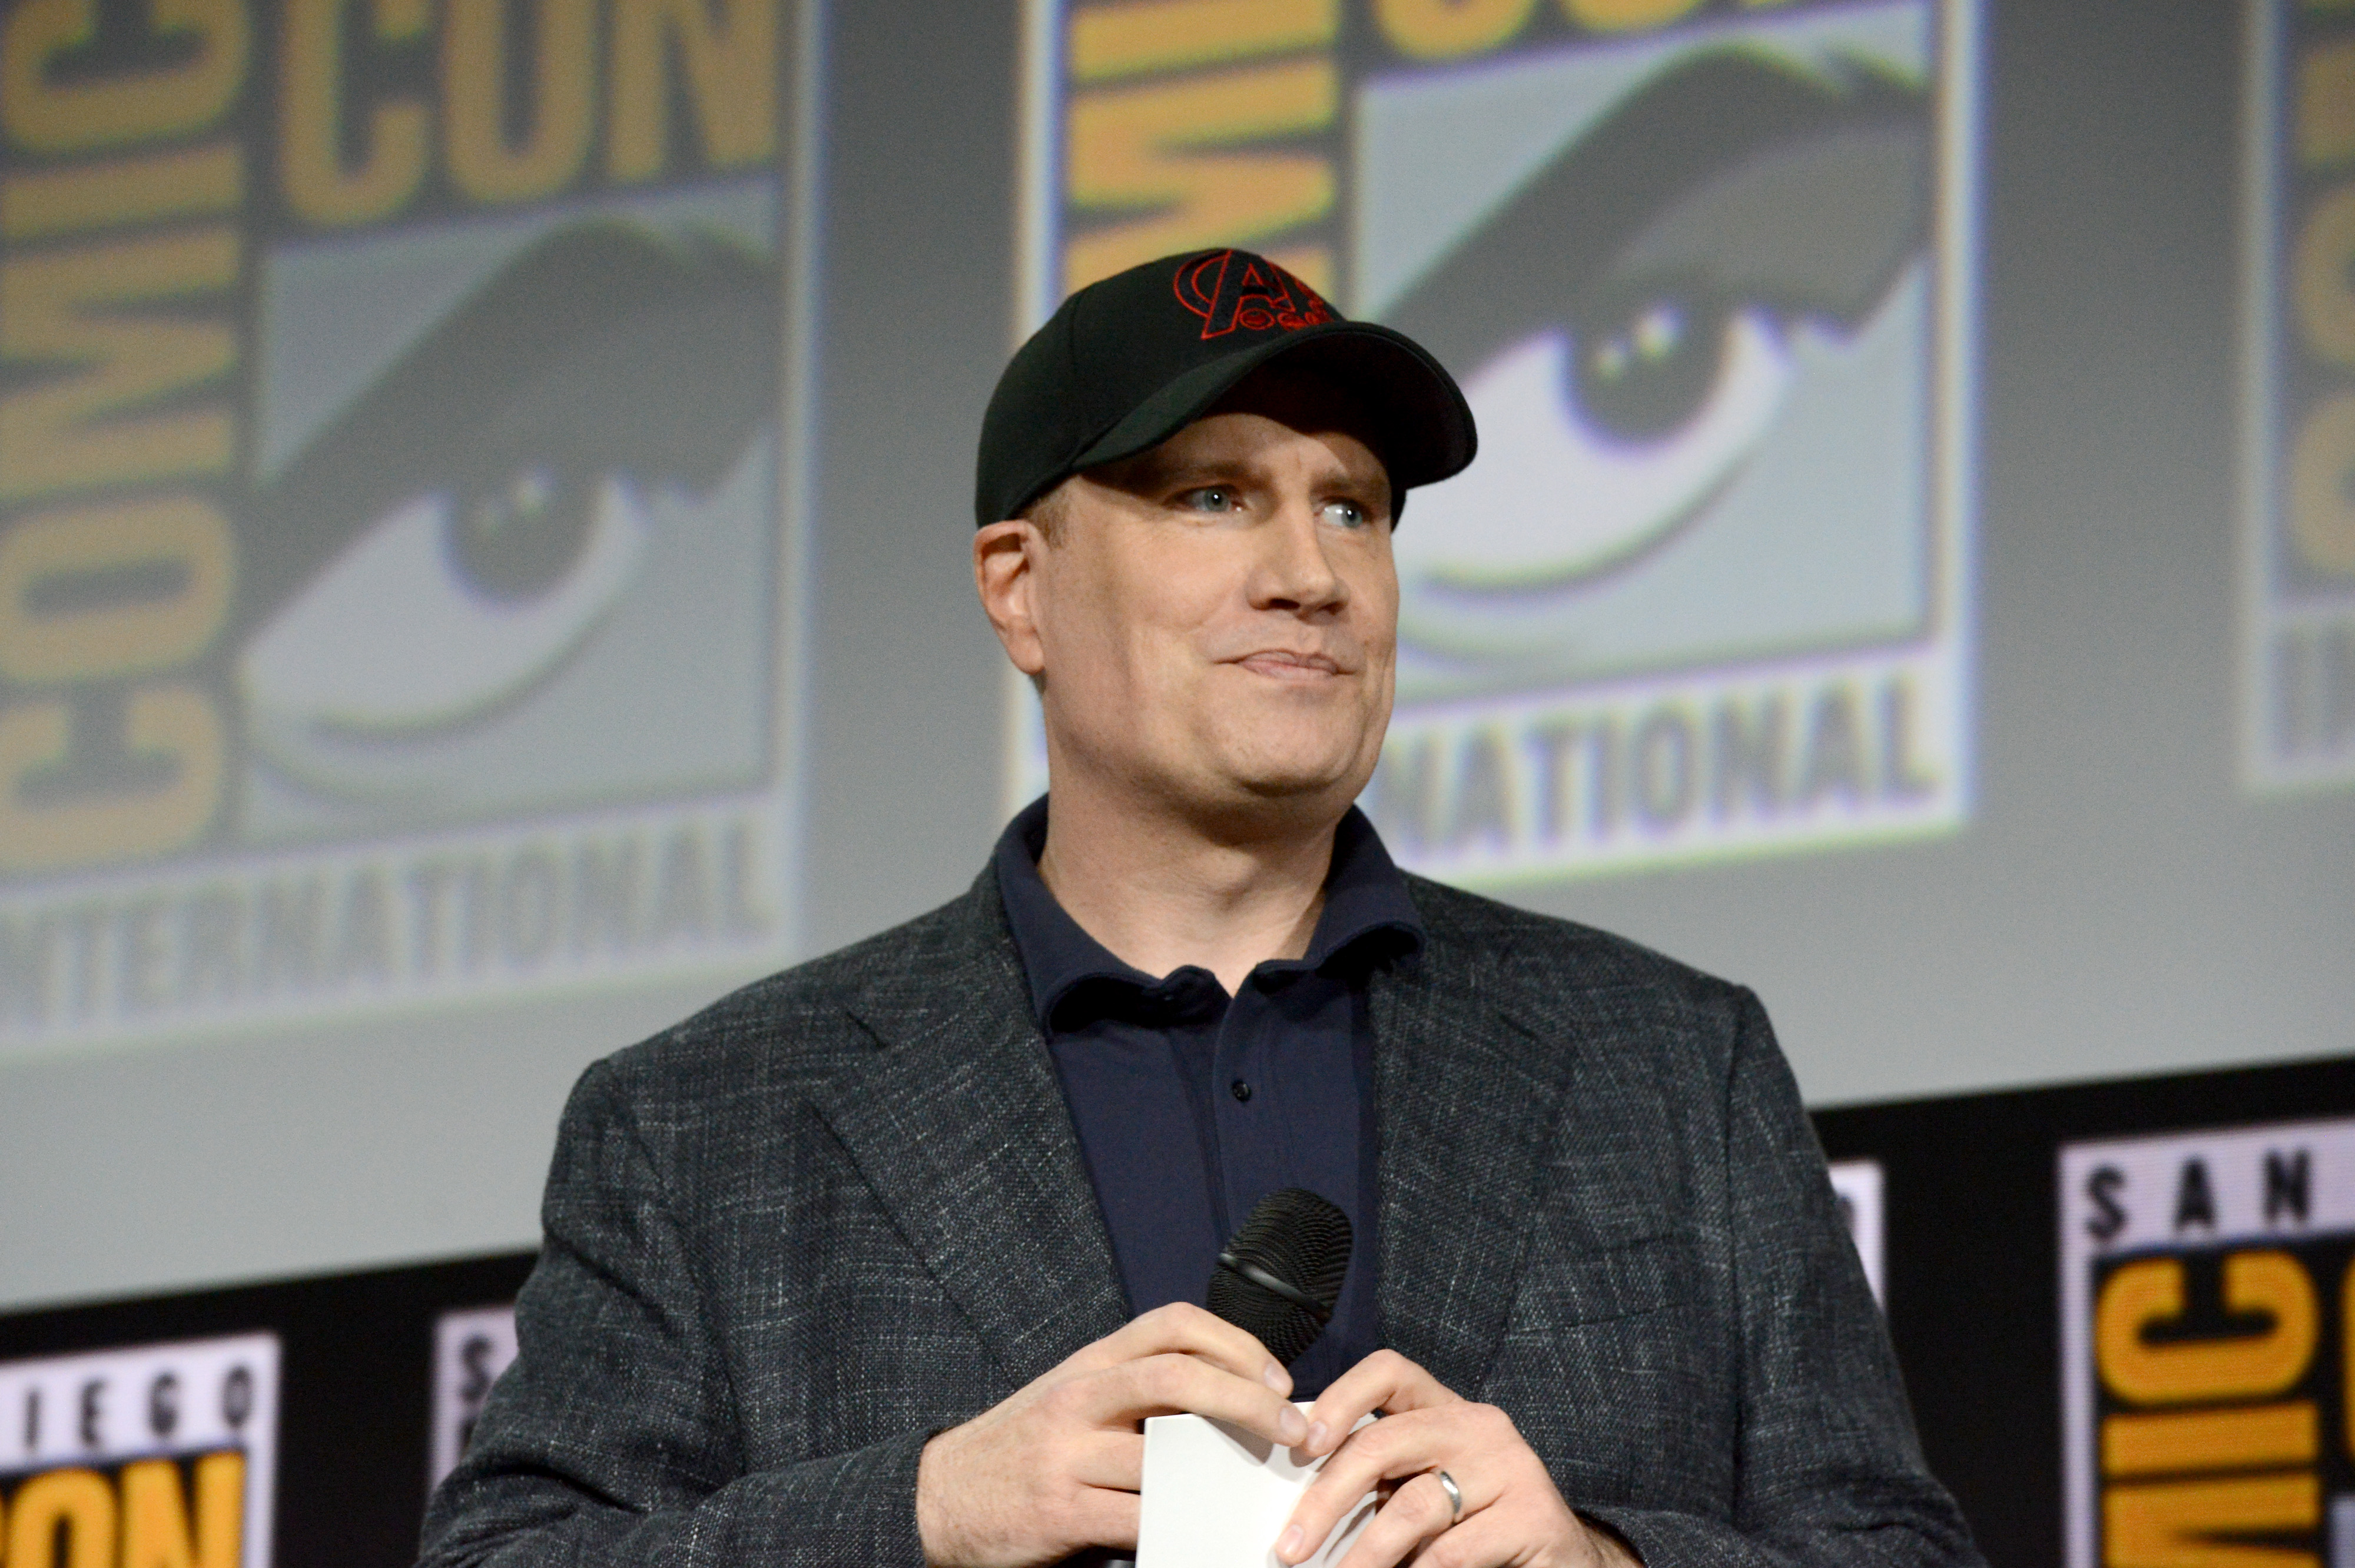 Marvel Studios president Kevin Feige appears onstage at San Diego Comic-Con in 2019. He wears a dark gray suit over a blue button-up shirt and a black baseball cap with a red Avengers logo on it.